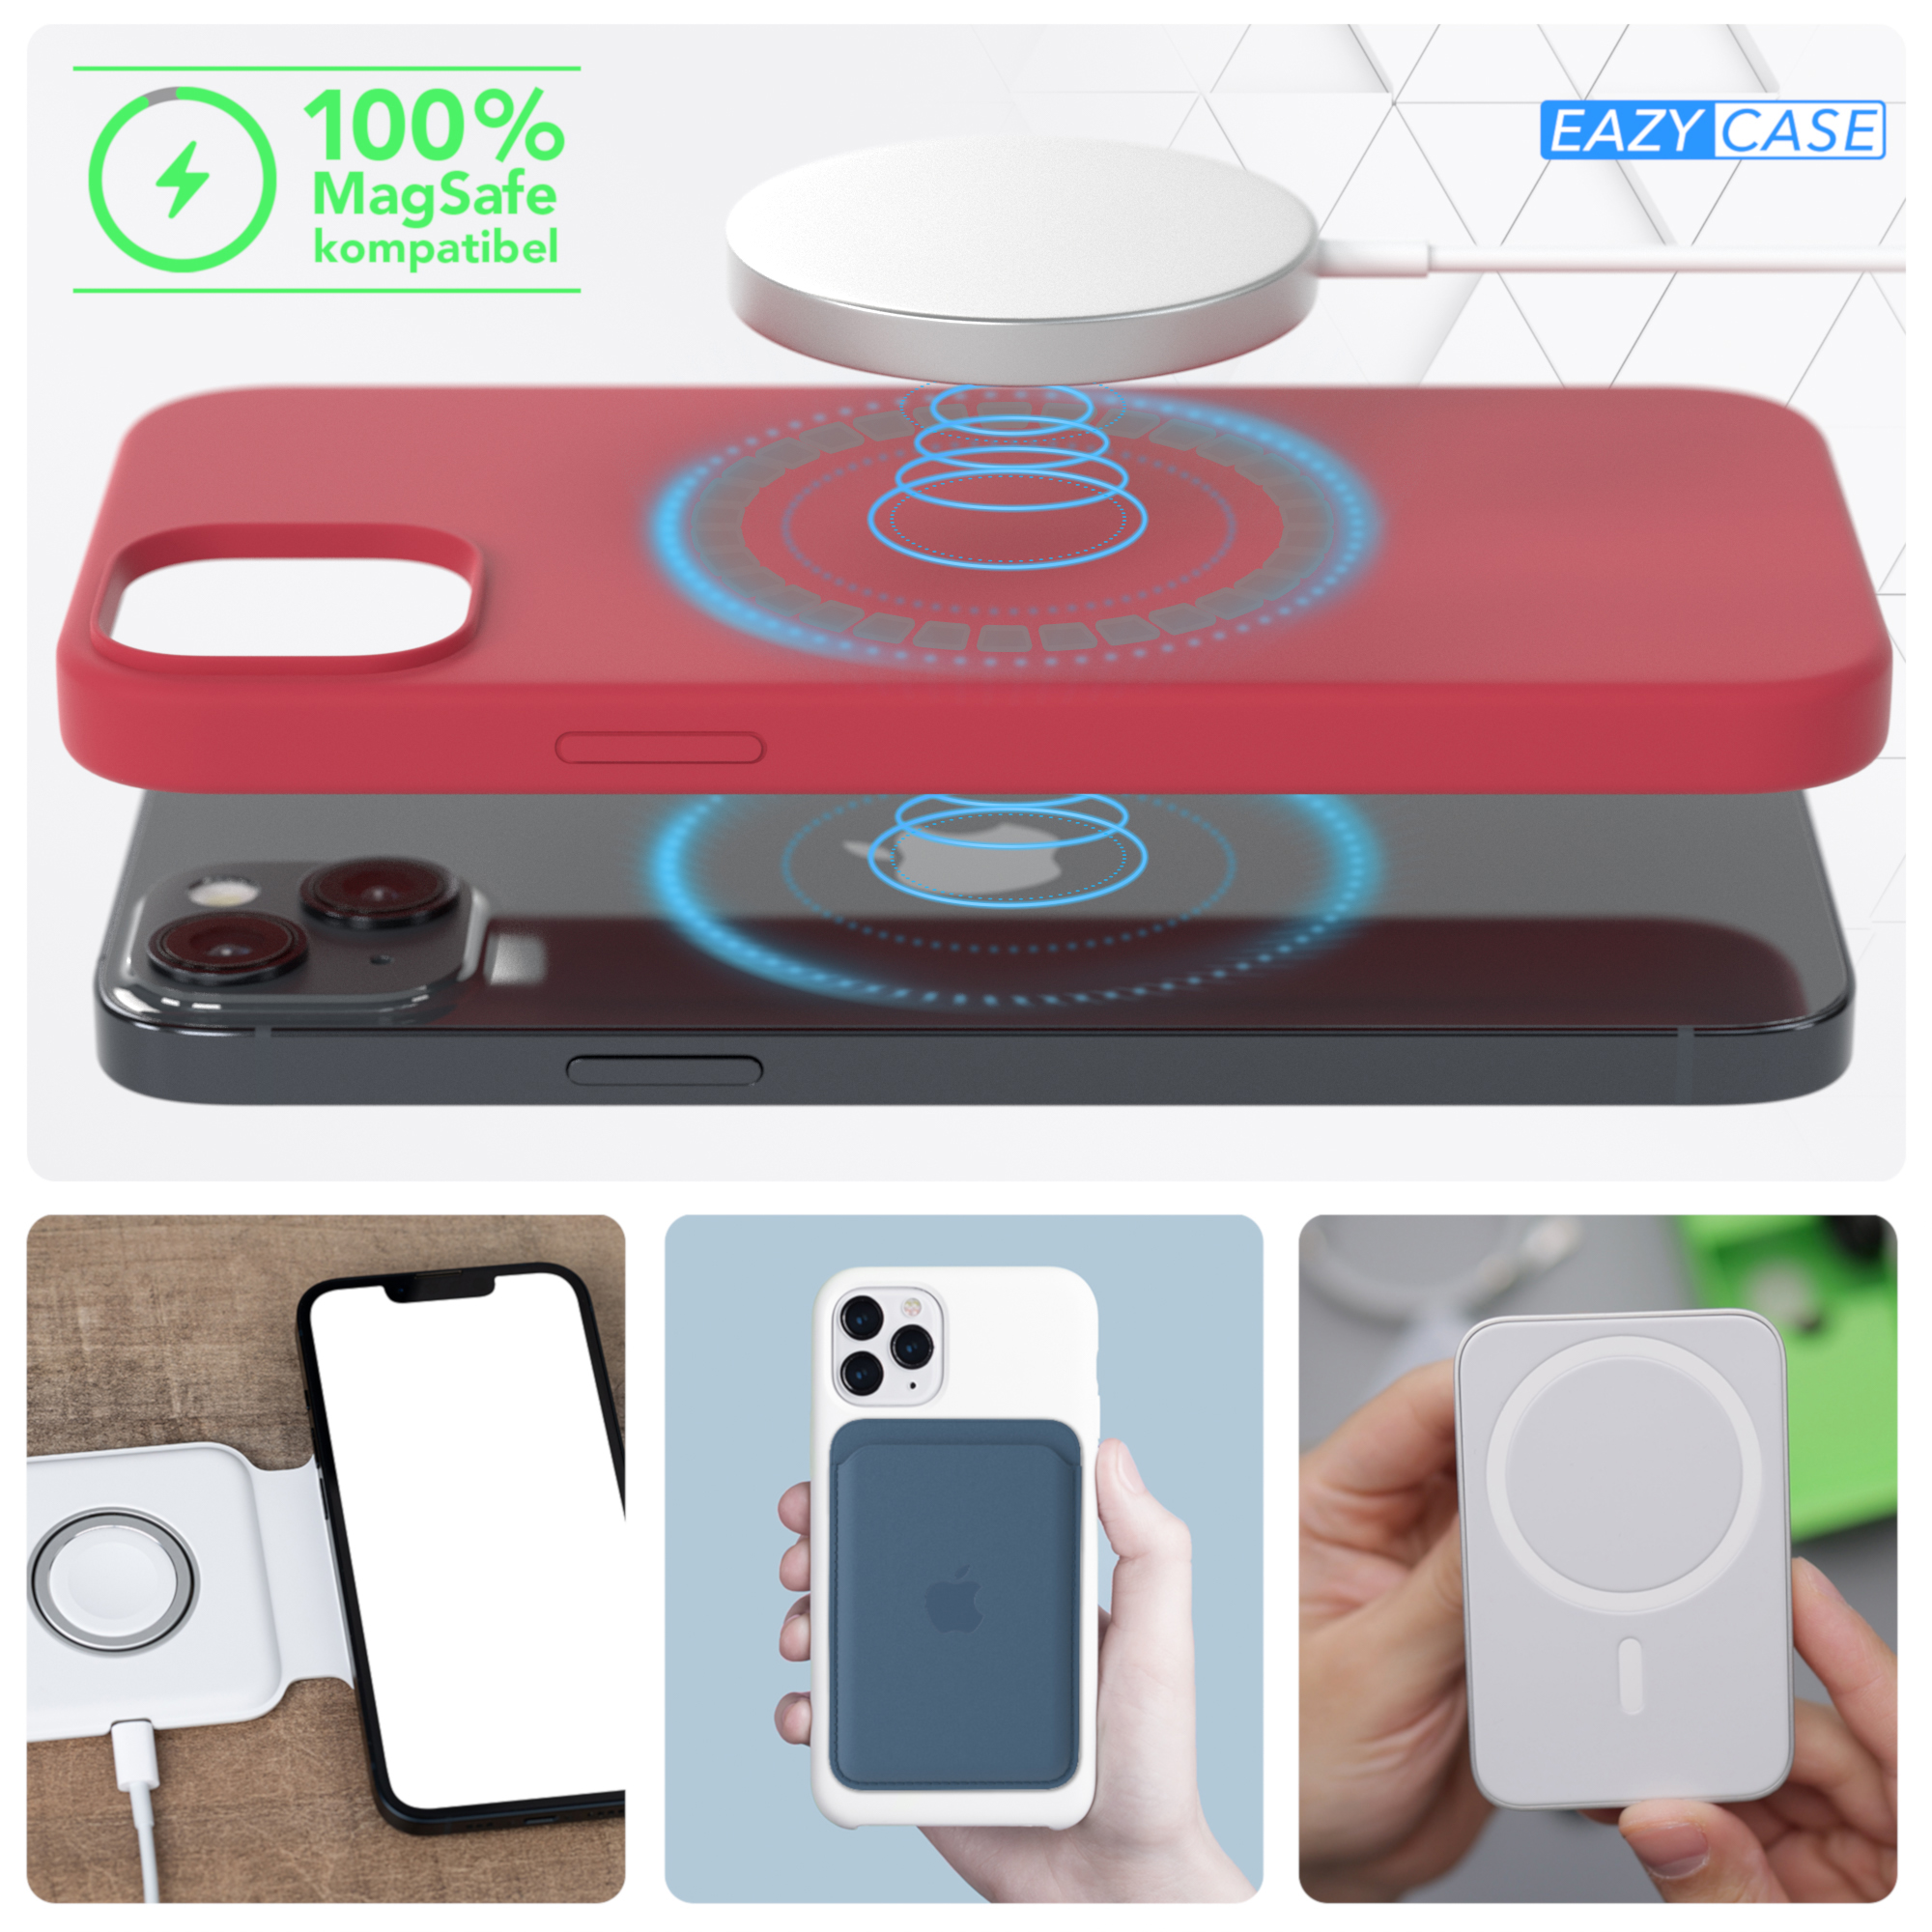 14 Rot Apple, CASE Beere Premium Handycase iPhone Backcover, Plus, Silikon EAZY / mit MagSafe,